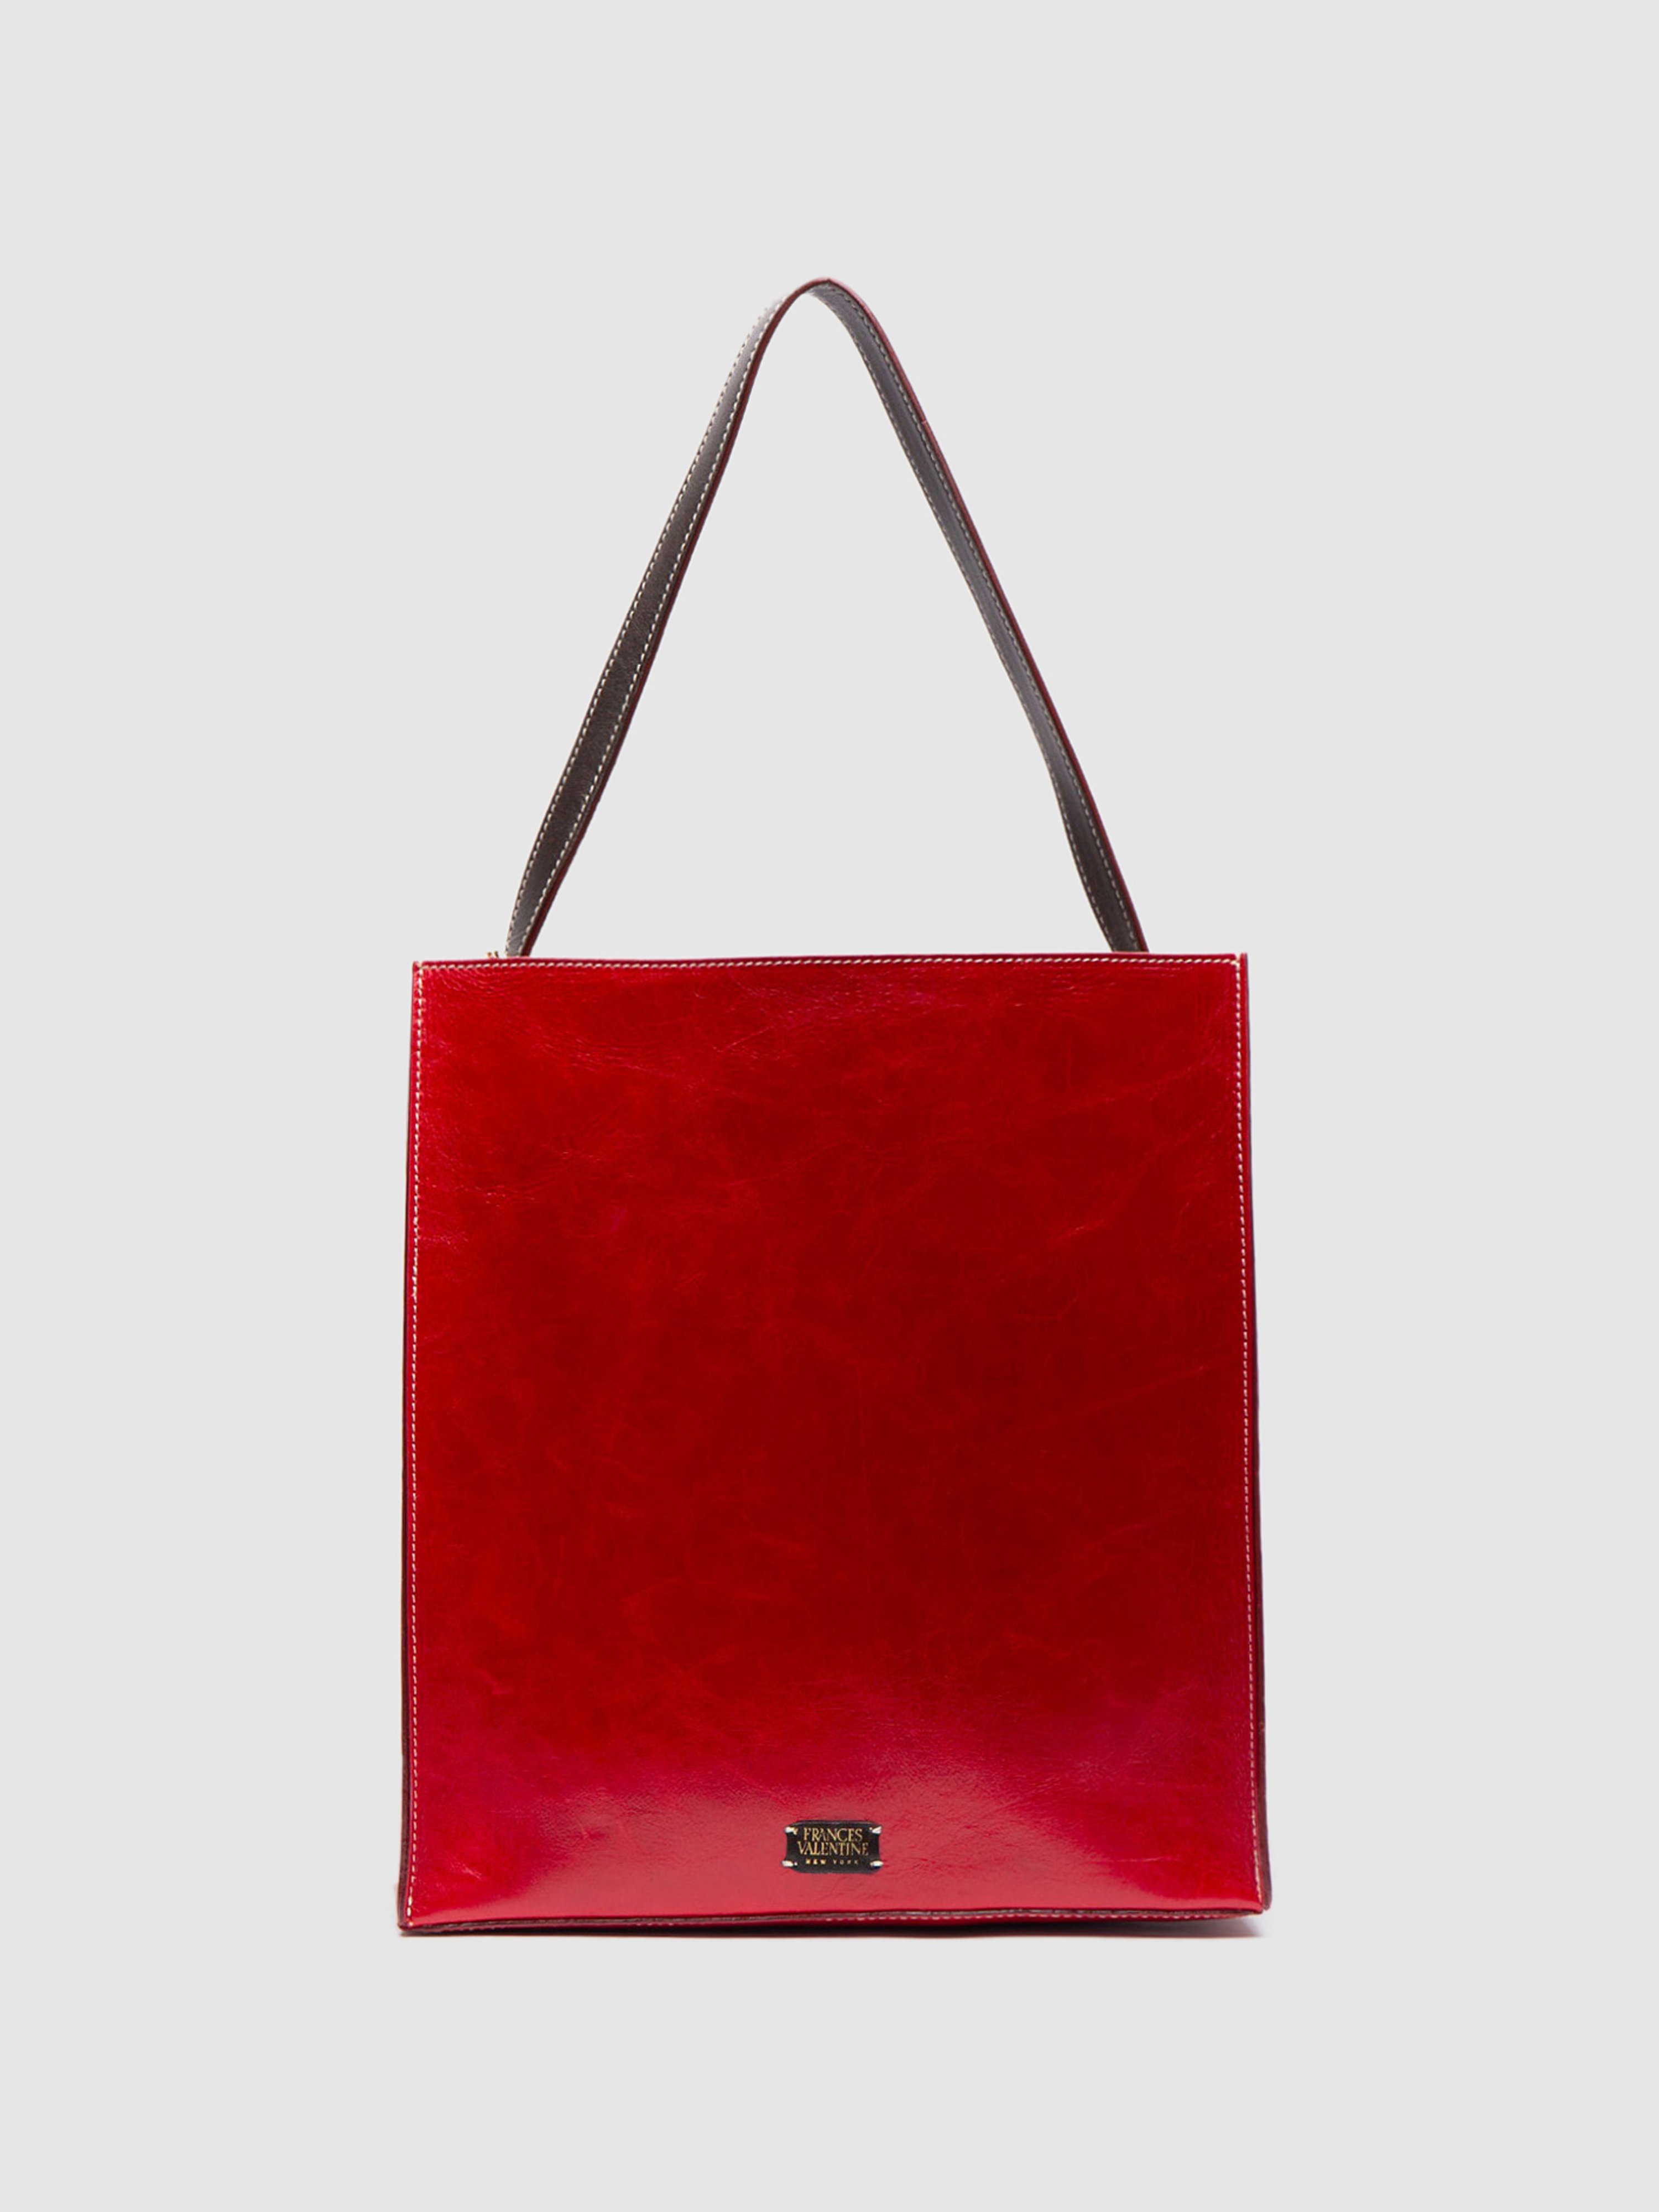 Frances Valentine Finn Naplak Leather Tote In Pink Red